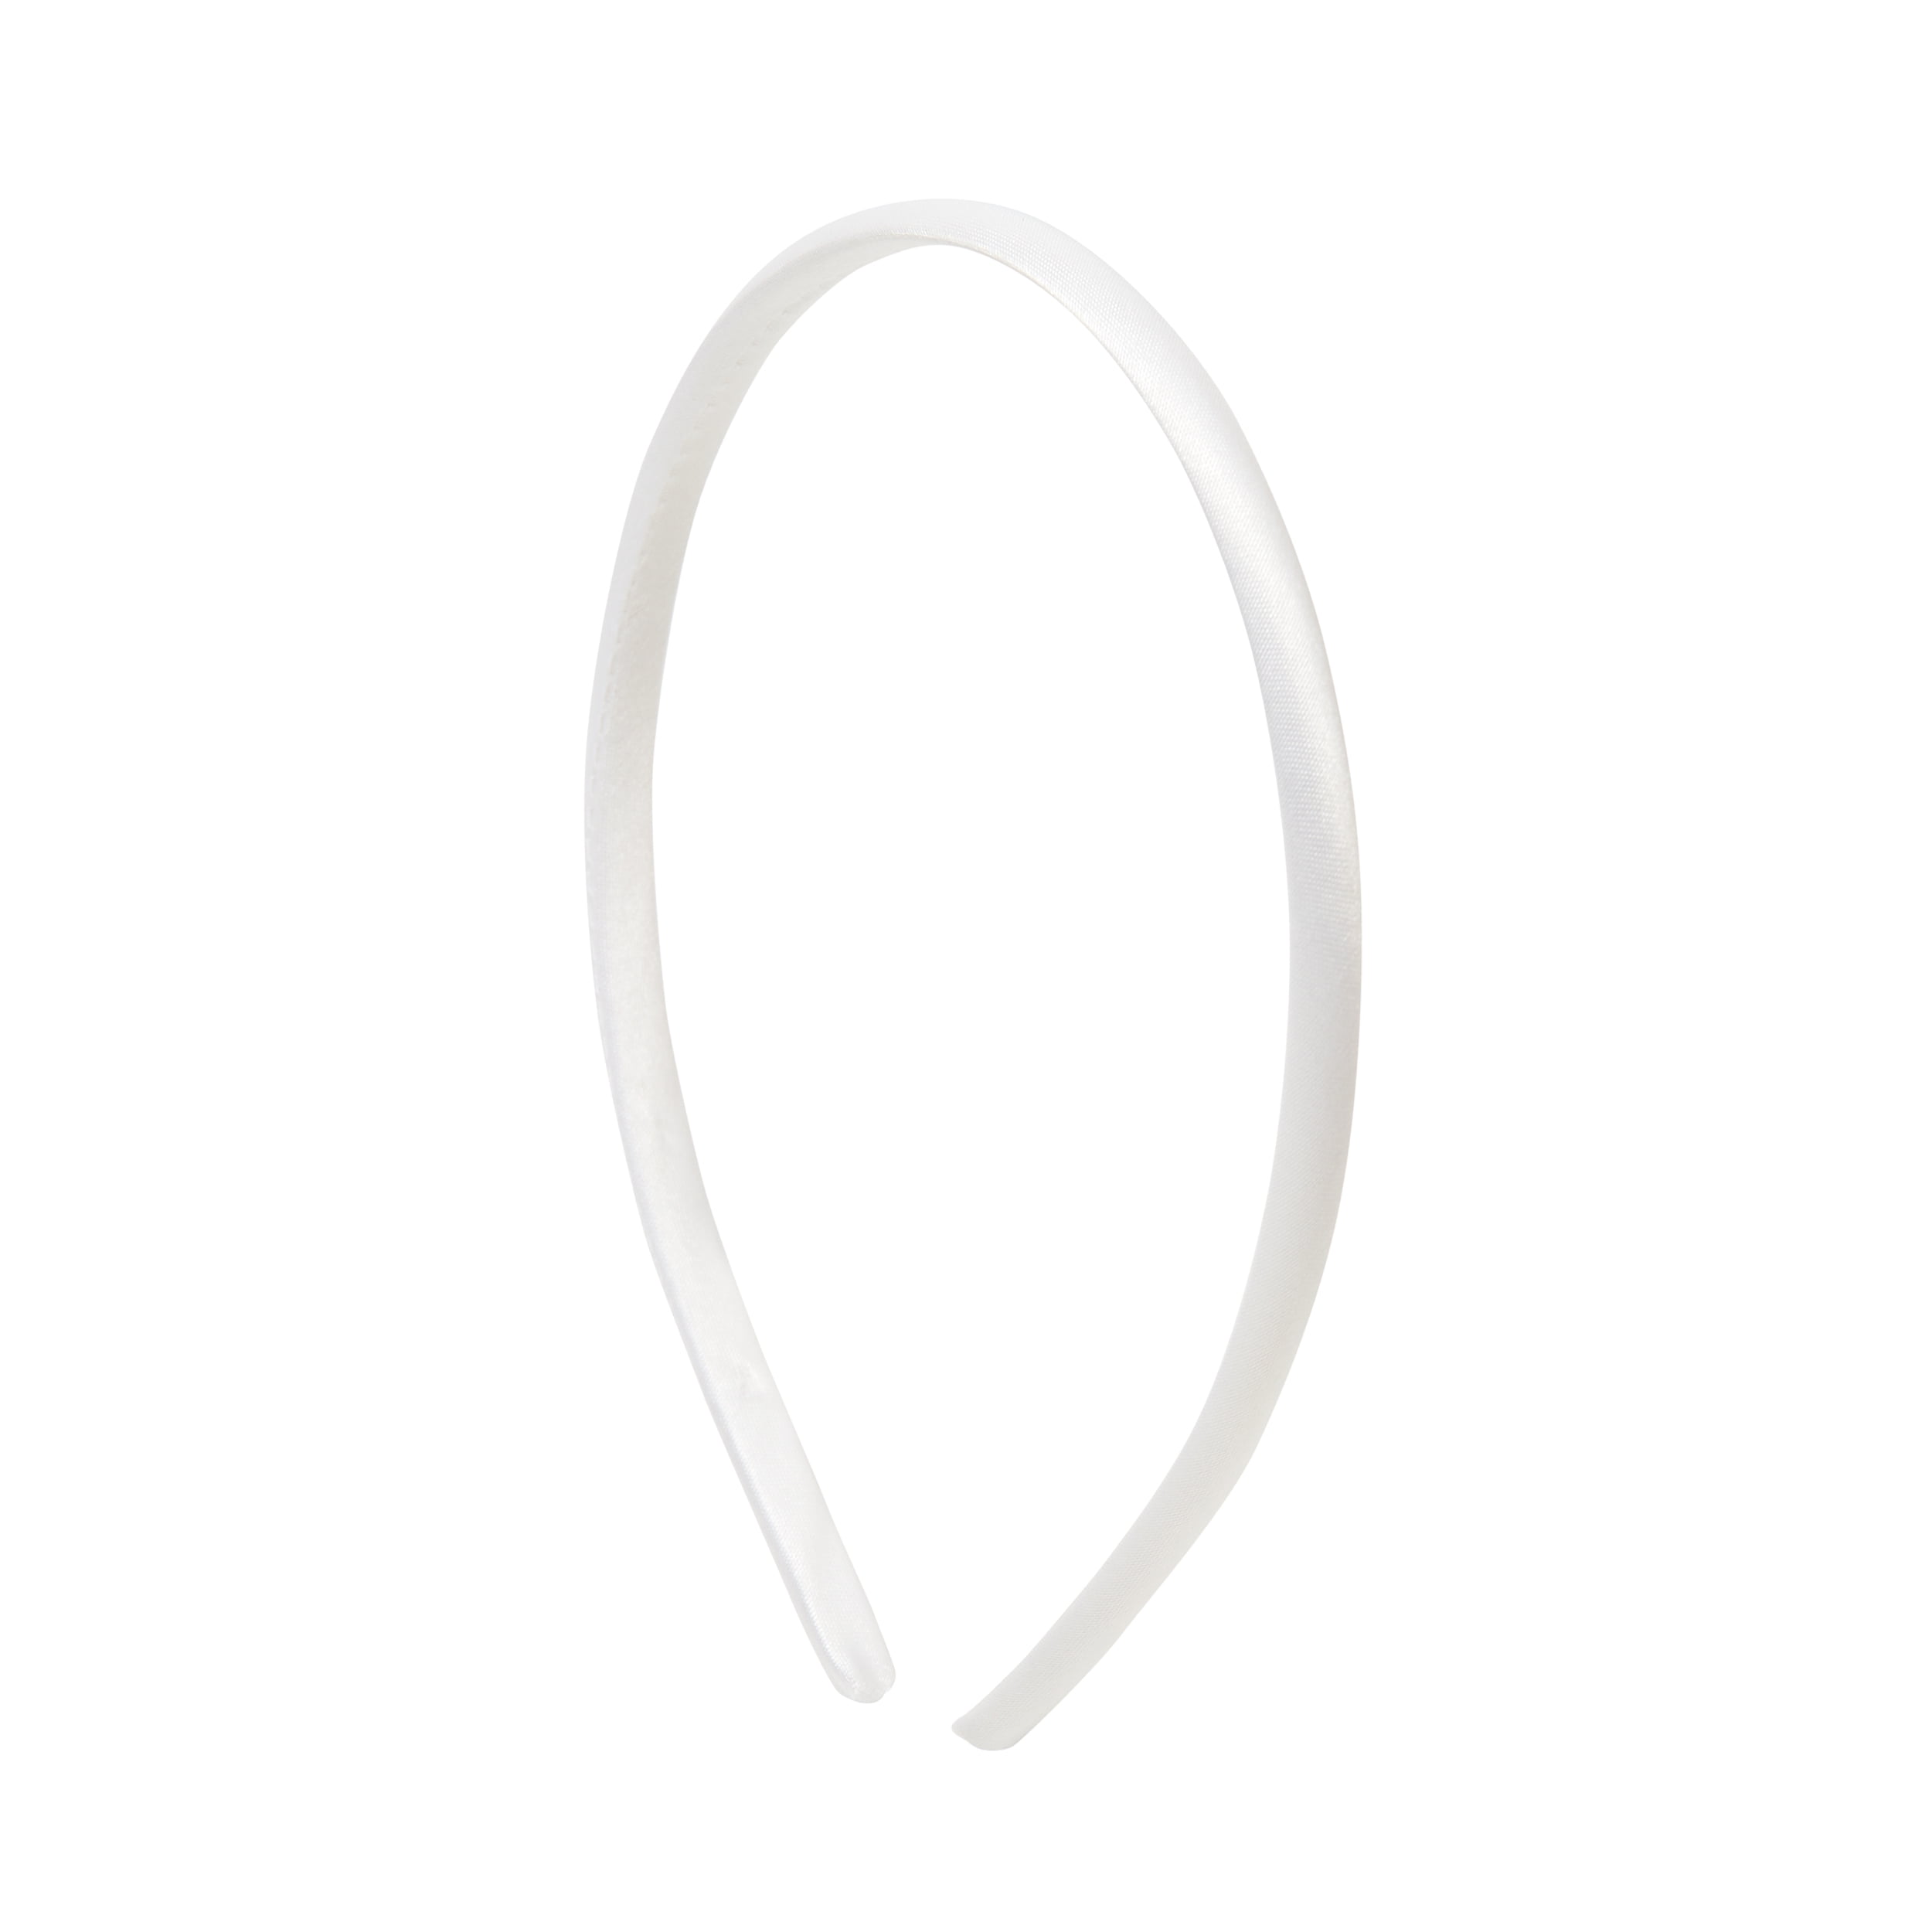 Offray White Satin Headband perfect hair crafting accessory for embellishing and decorating, 1 Each